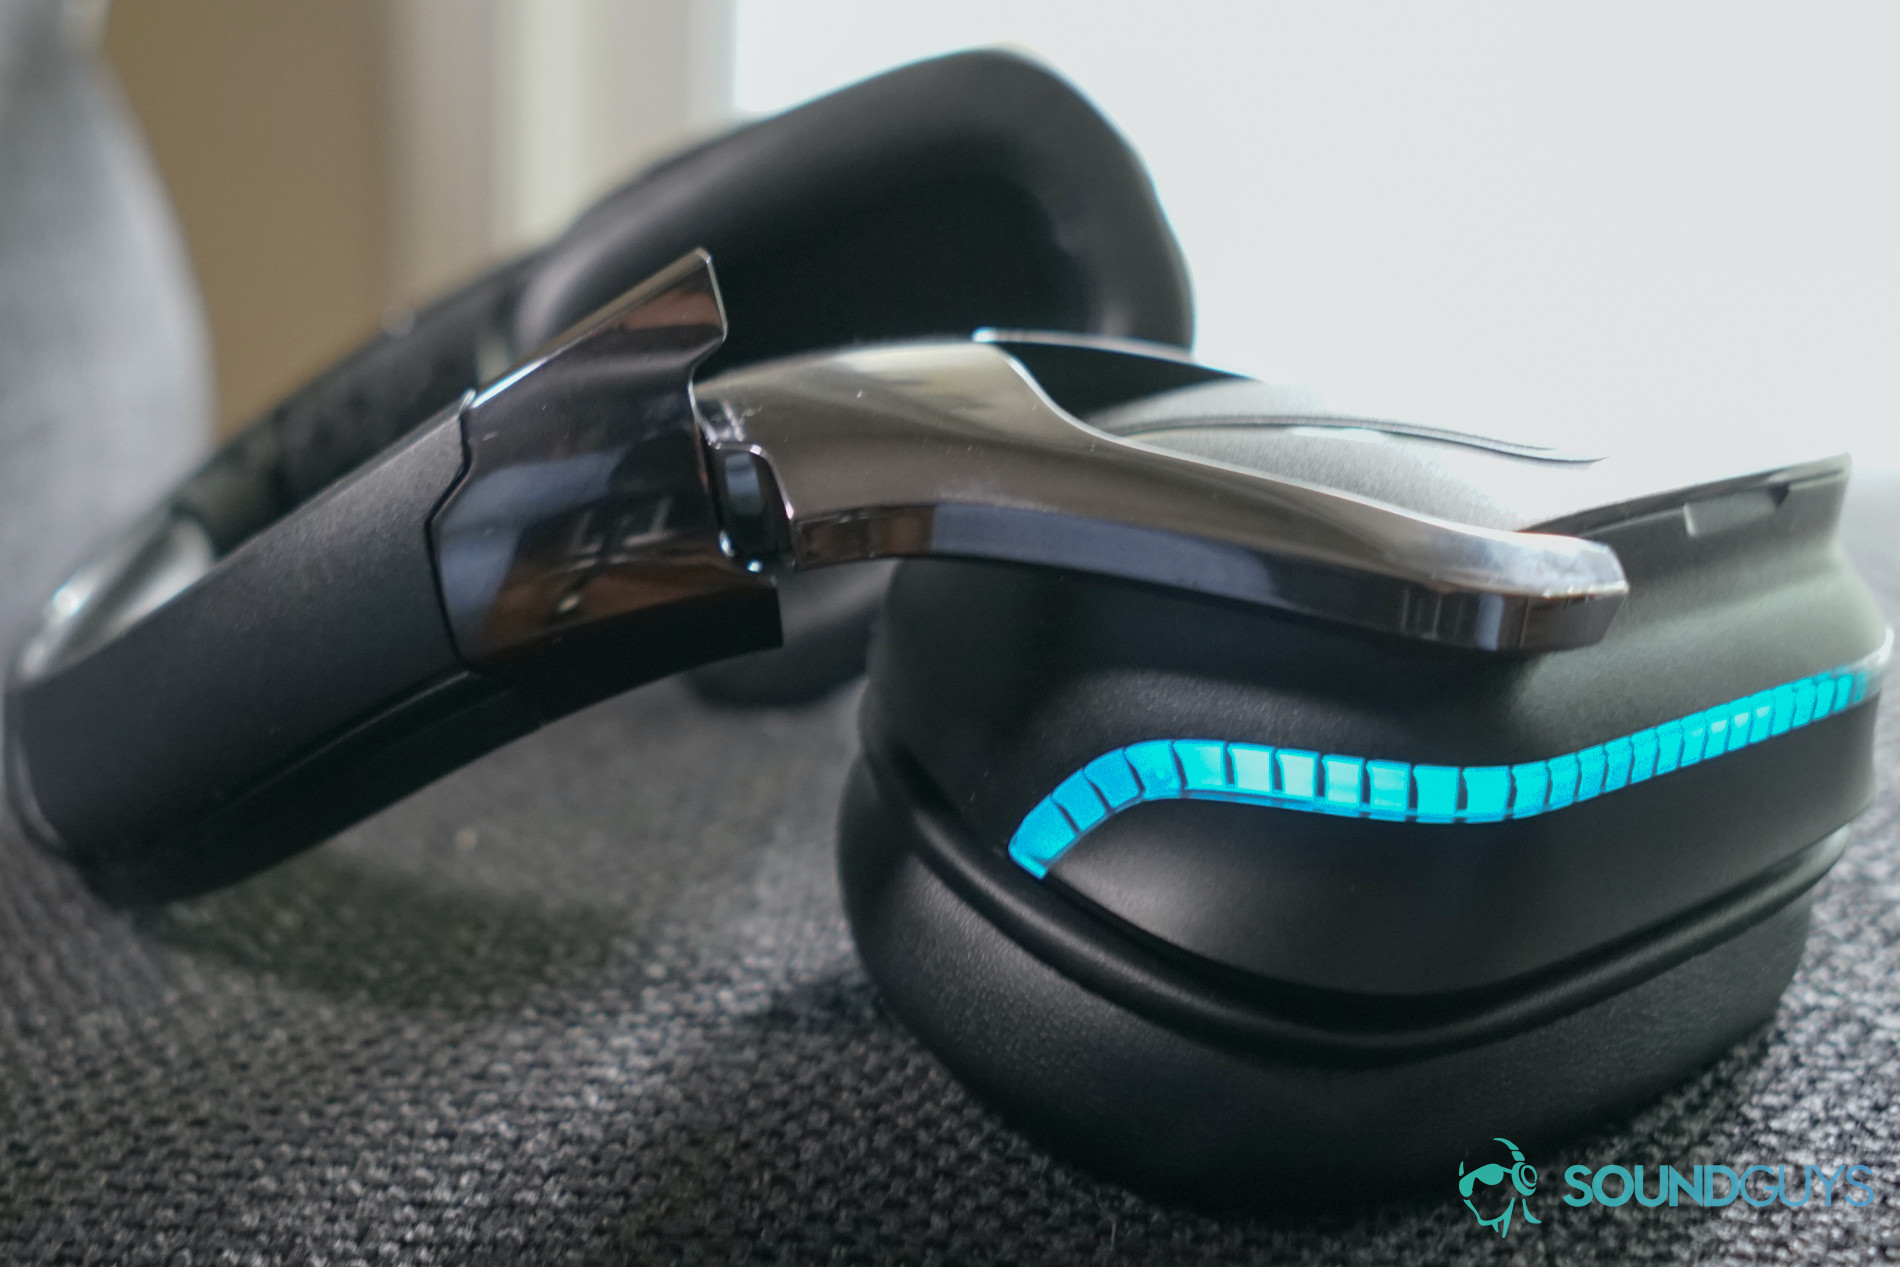 The Logitech G935 gaming headset lays on a fabric surface.